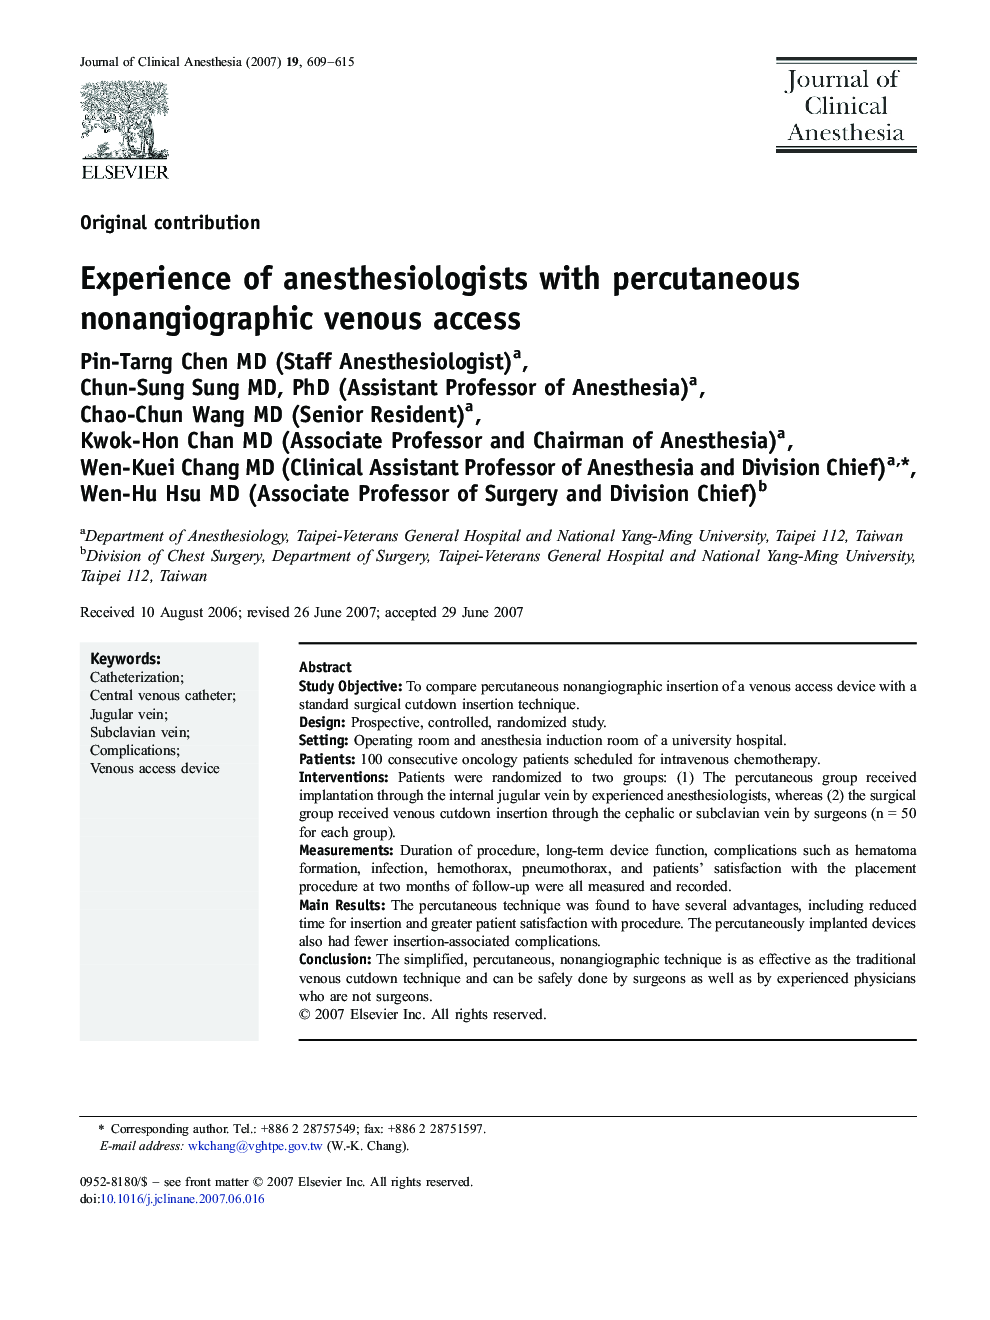 Experience of anesthesiologists with percutaneous nonangiographic venous access